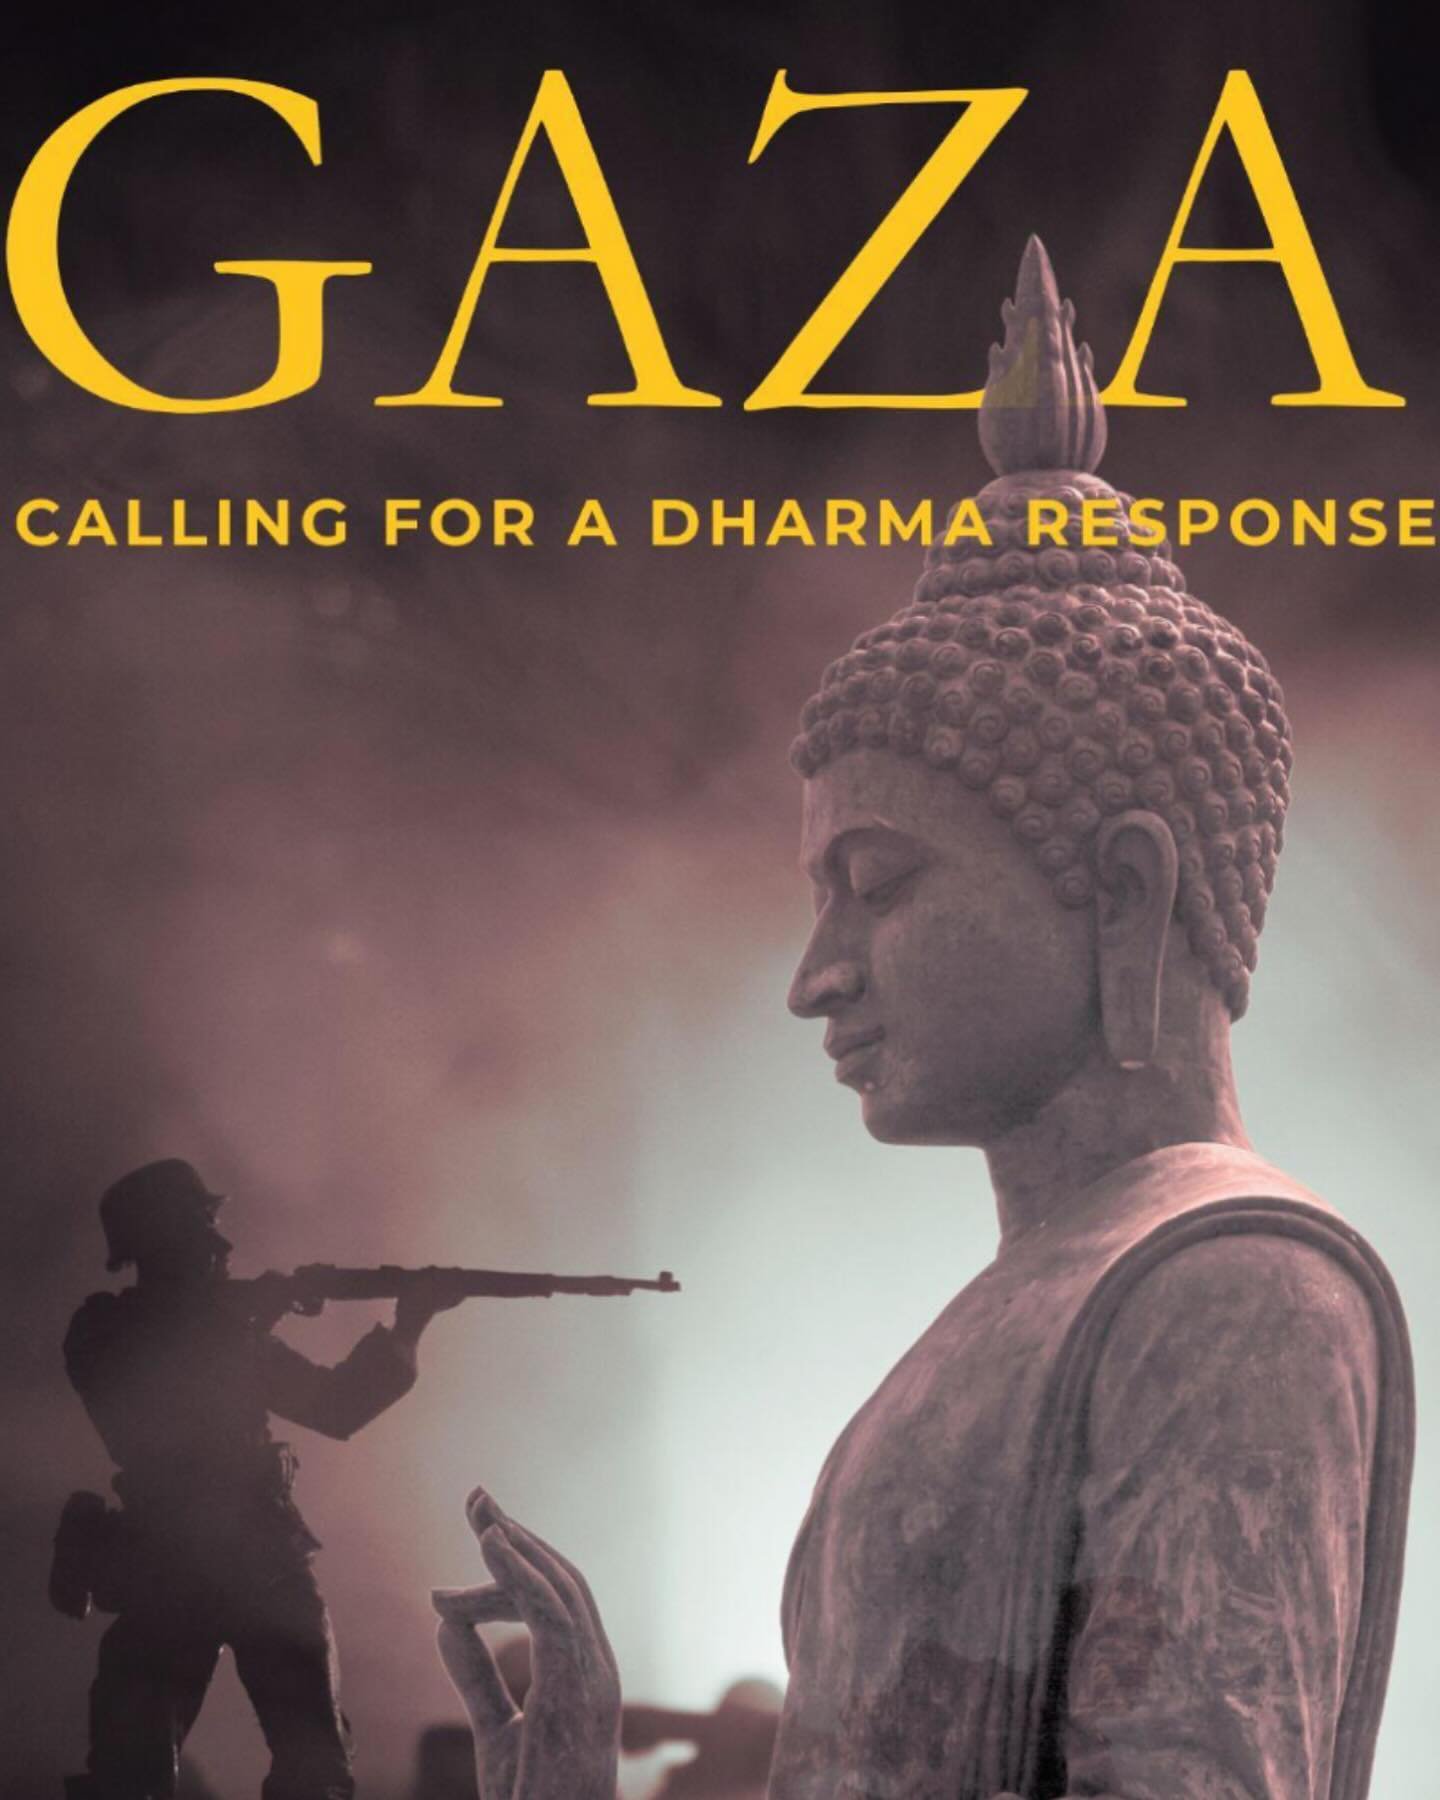 Gratitude to Sacred, Mountain Sanga and Sacred justice coalition for putting together this incredible 64 page zine. This is a.collaborative offering of articles, letters, and courageous reflections  from the heart in response to the crisis in Gaza. A